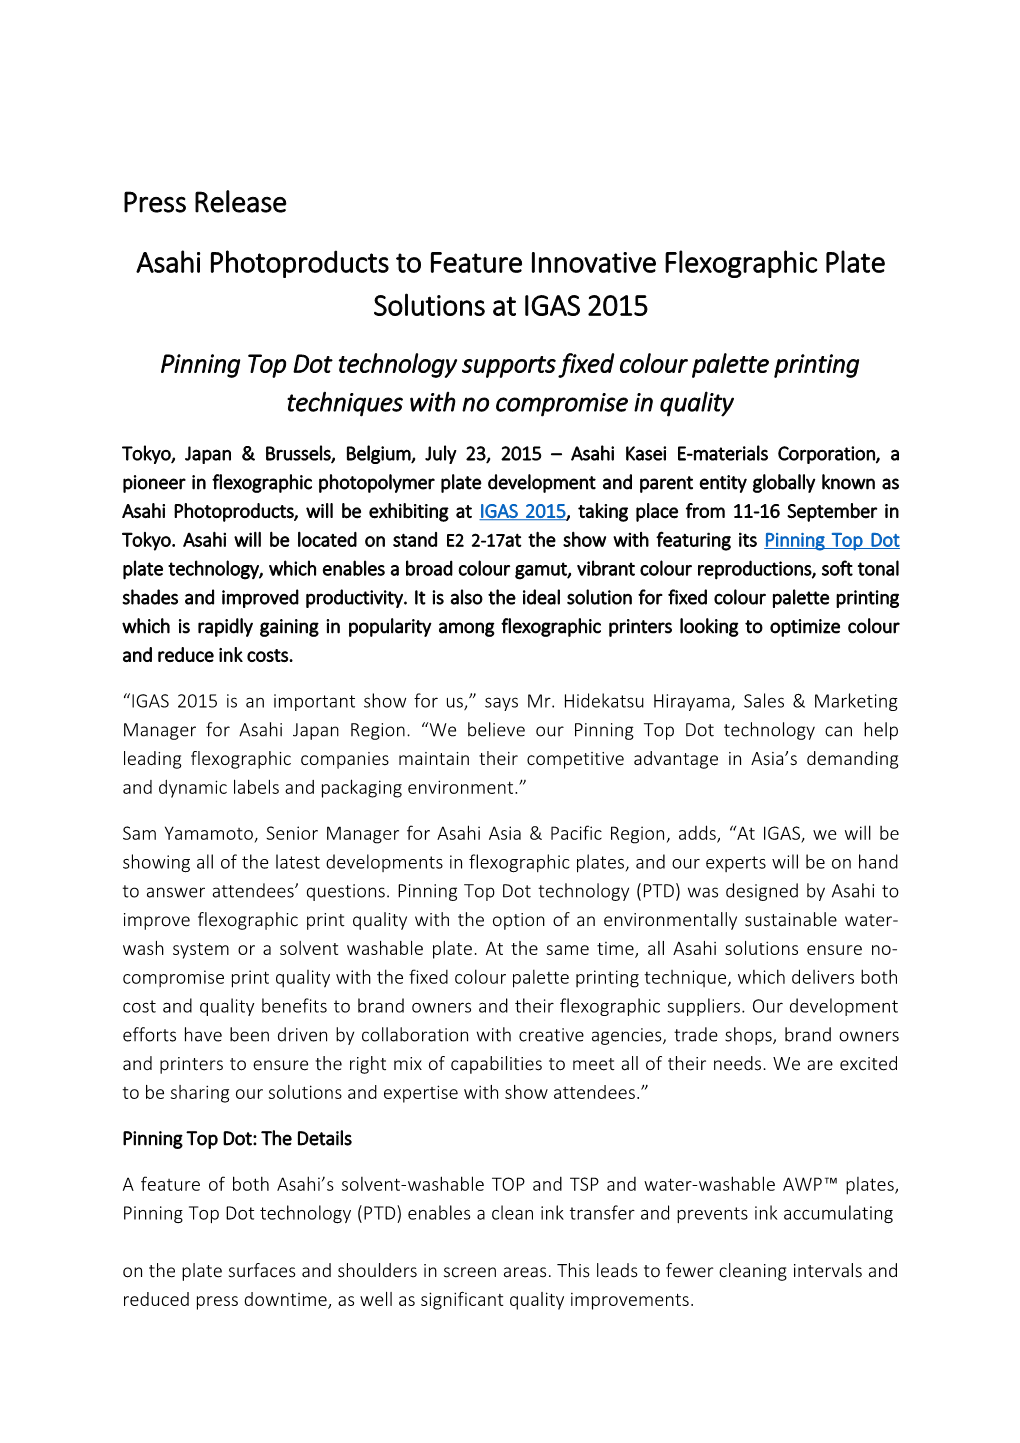 Asahi Photoproducts to Feature Innovative Flexographic Plate Solutions at IGAS 2015